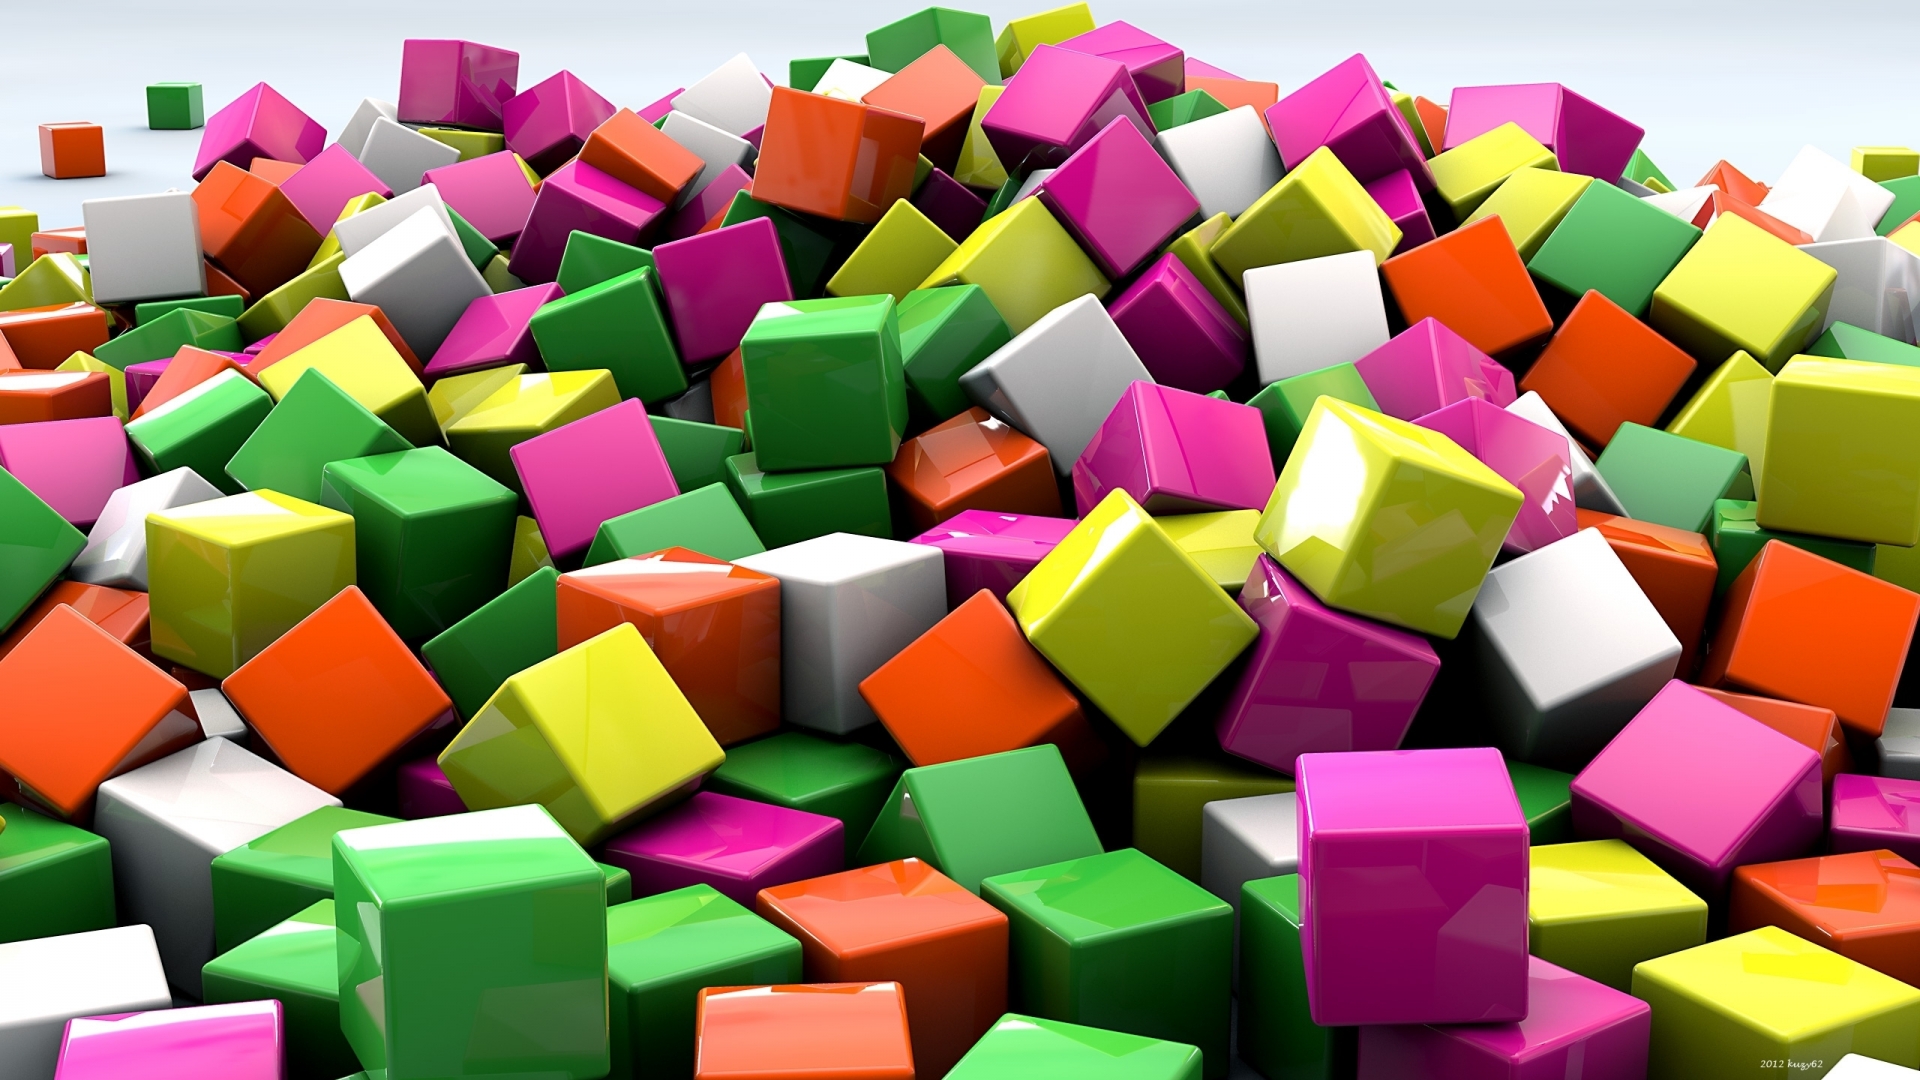 3D Coloured Cubed for 1920 x 1080 HDTV 1080p resolution